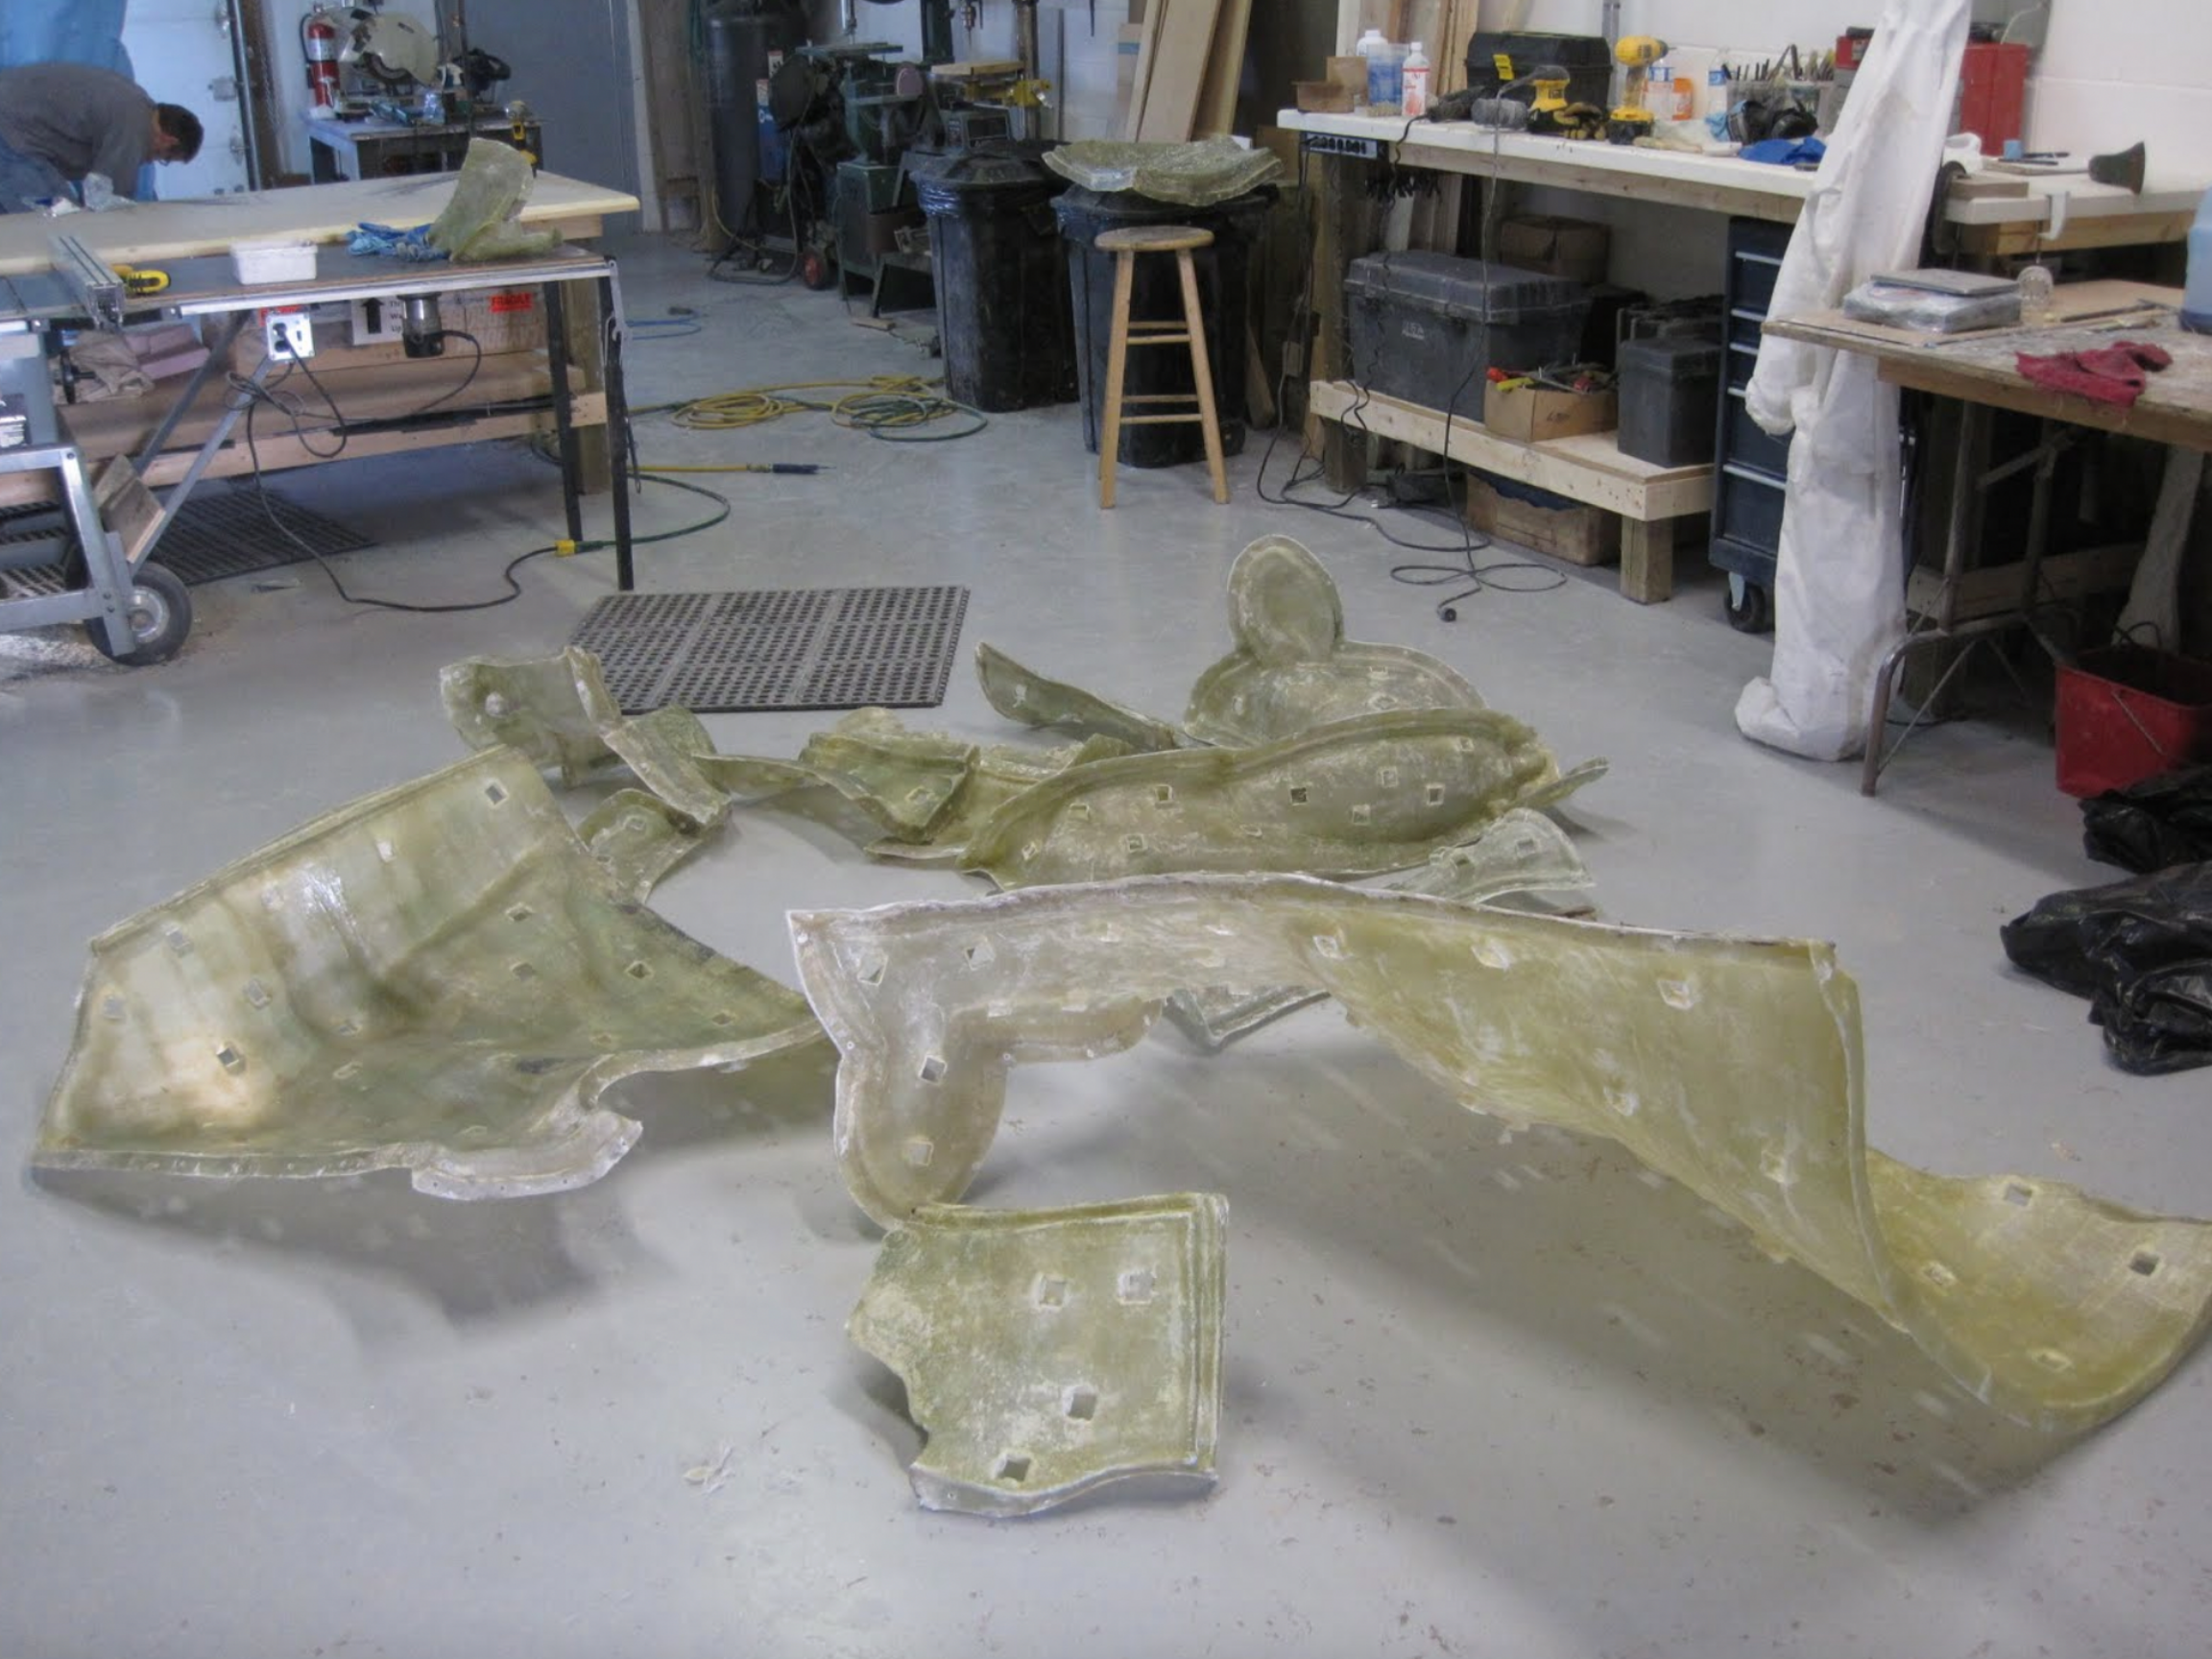  A portion of the 23 pieces of fiberglass jacket that will support the rubber portion of the Holstein mold. Highly detailed copies of the original sculpture can now be produced in fiberglass. These will be the basis for the Holstein dystocia simulato